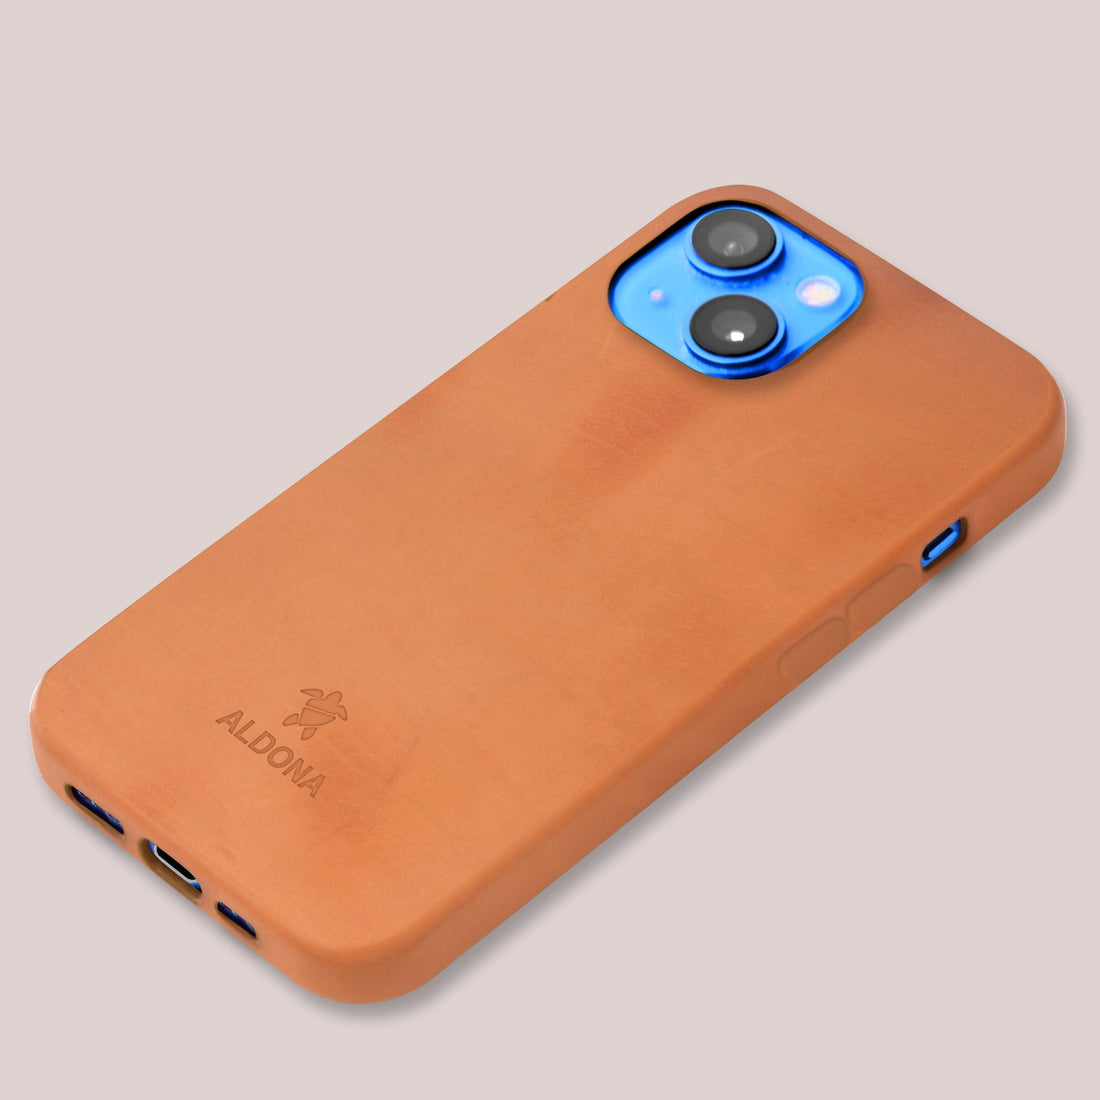 Kalon Case for iPhone 14 Pro with MagSafe Compatibility - Cognac